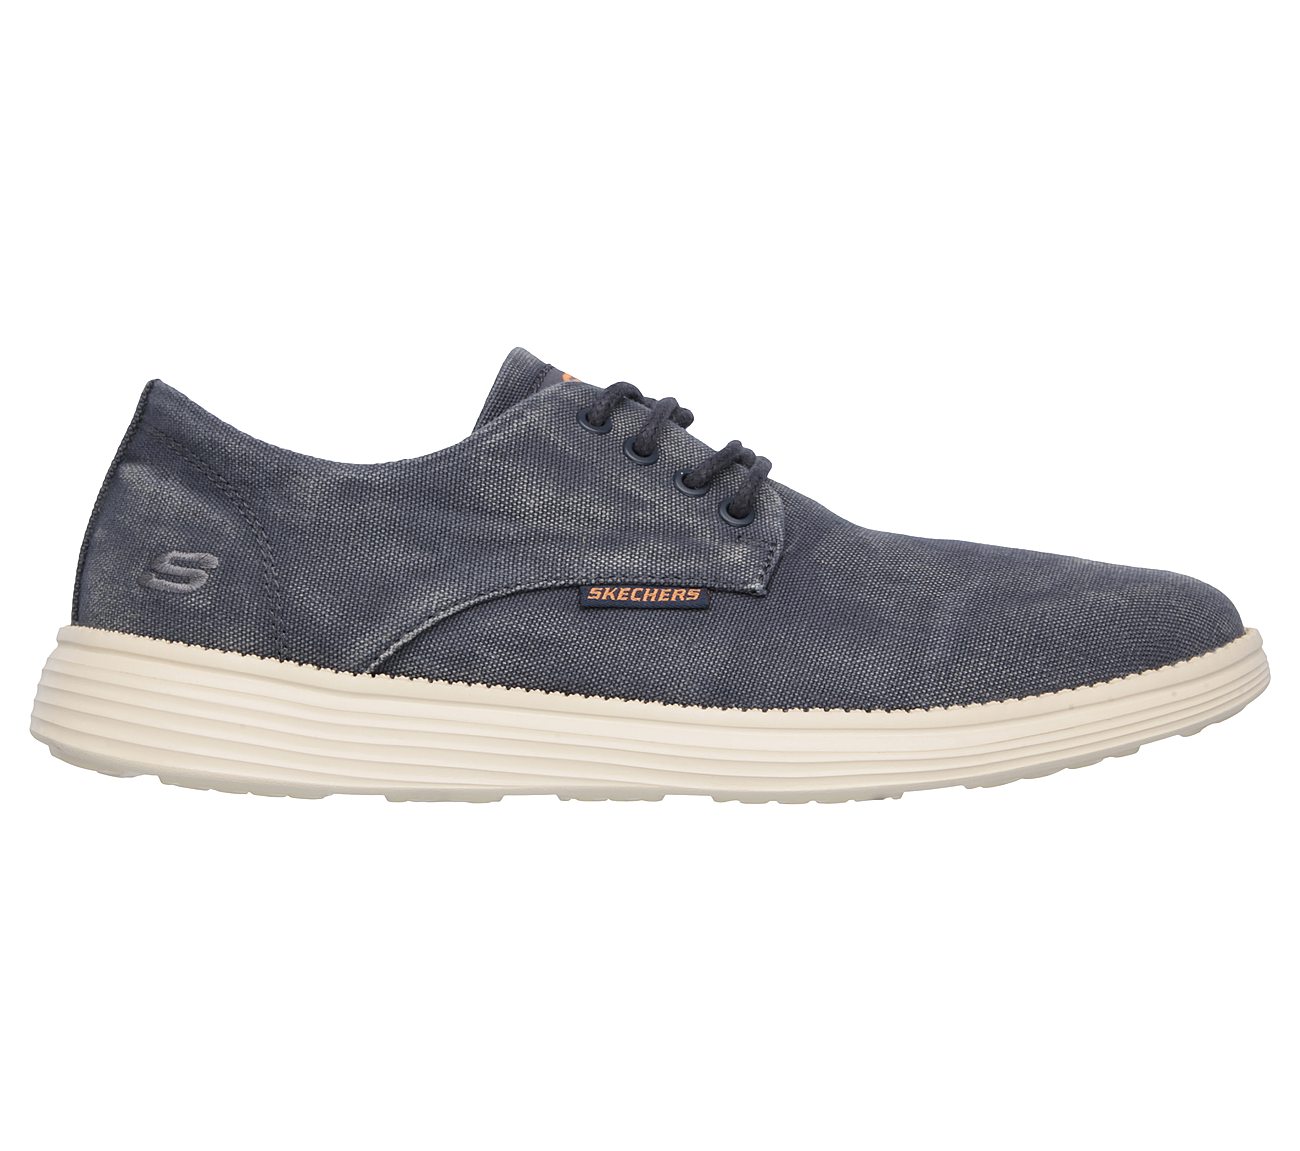 Status - Borges SKECHERS Relaxed Fit Shoes